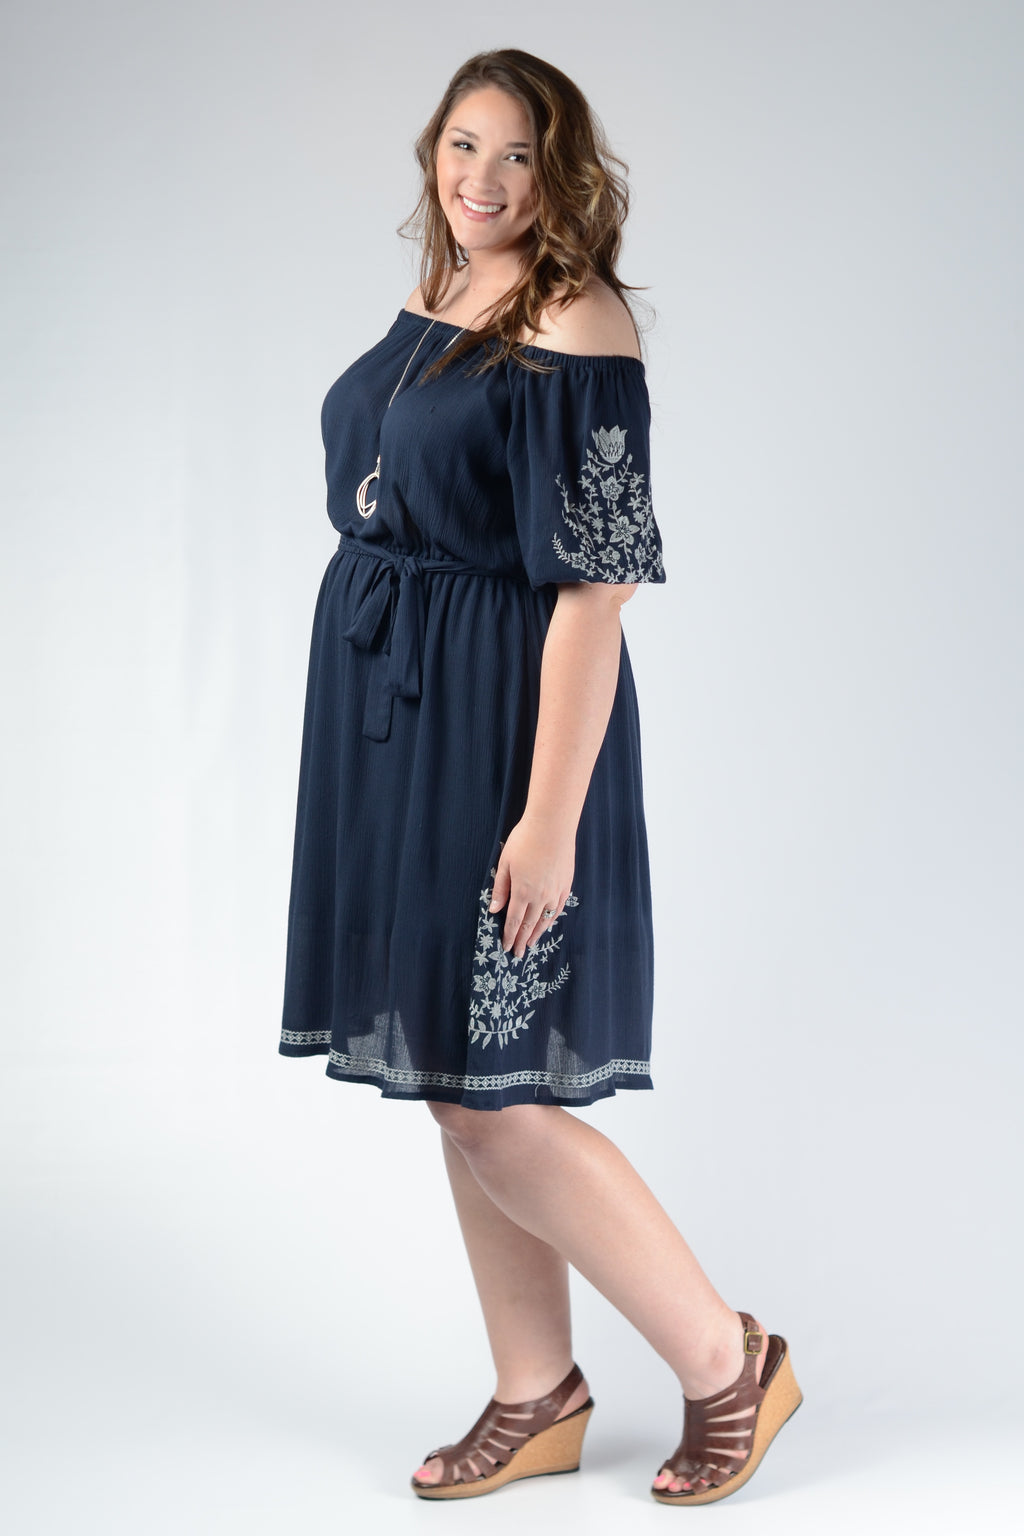 Navy Embroidered Dress - www.mycurvystore.com - Curvy Boutique - Plus Size